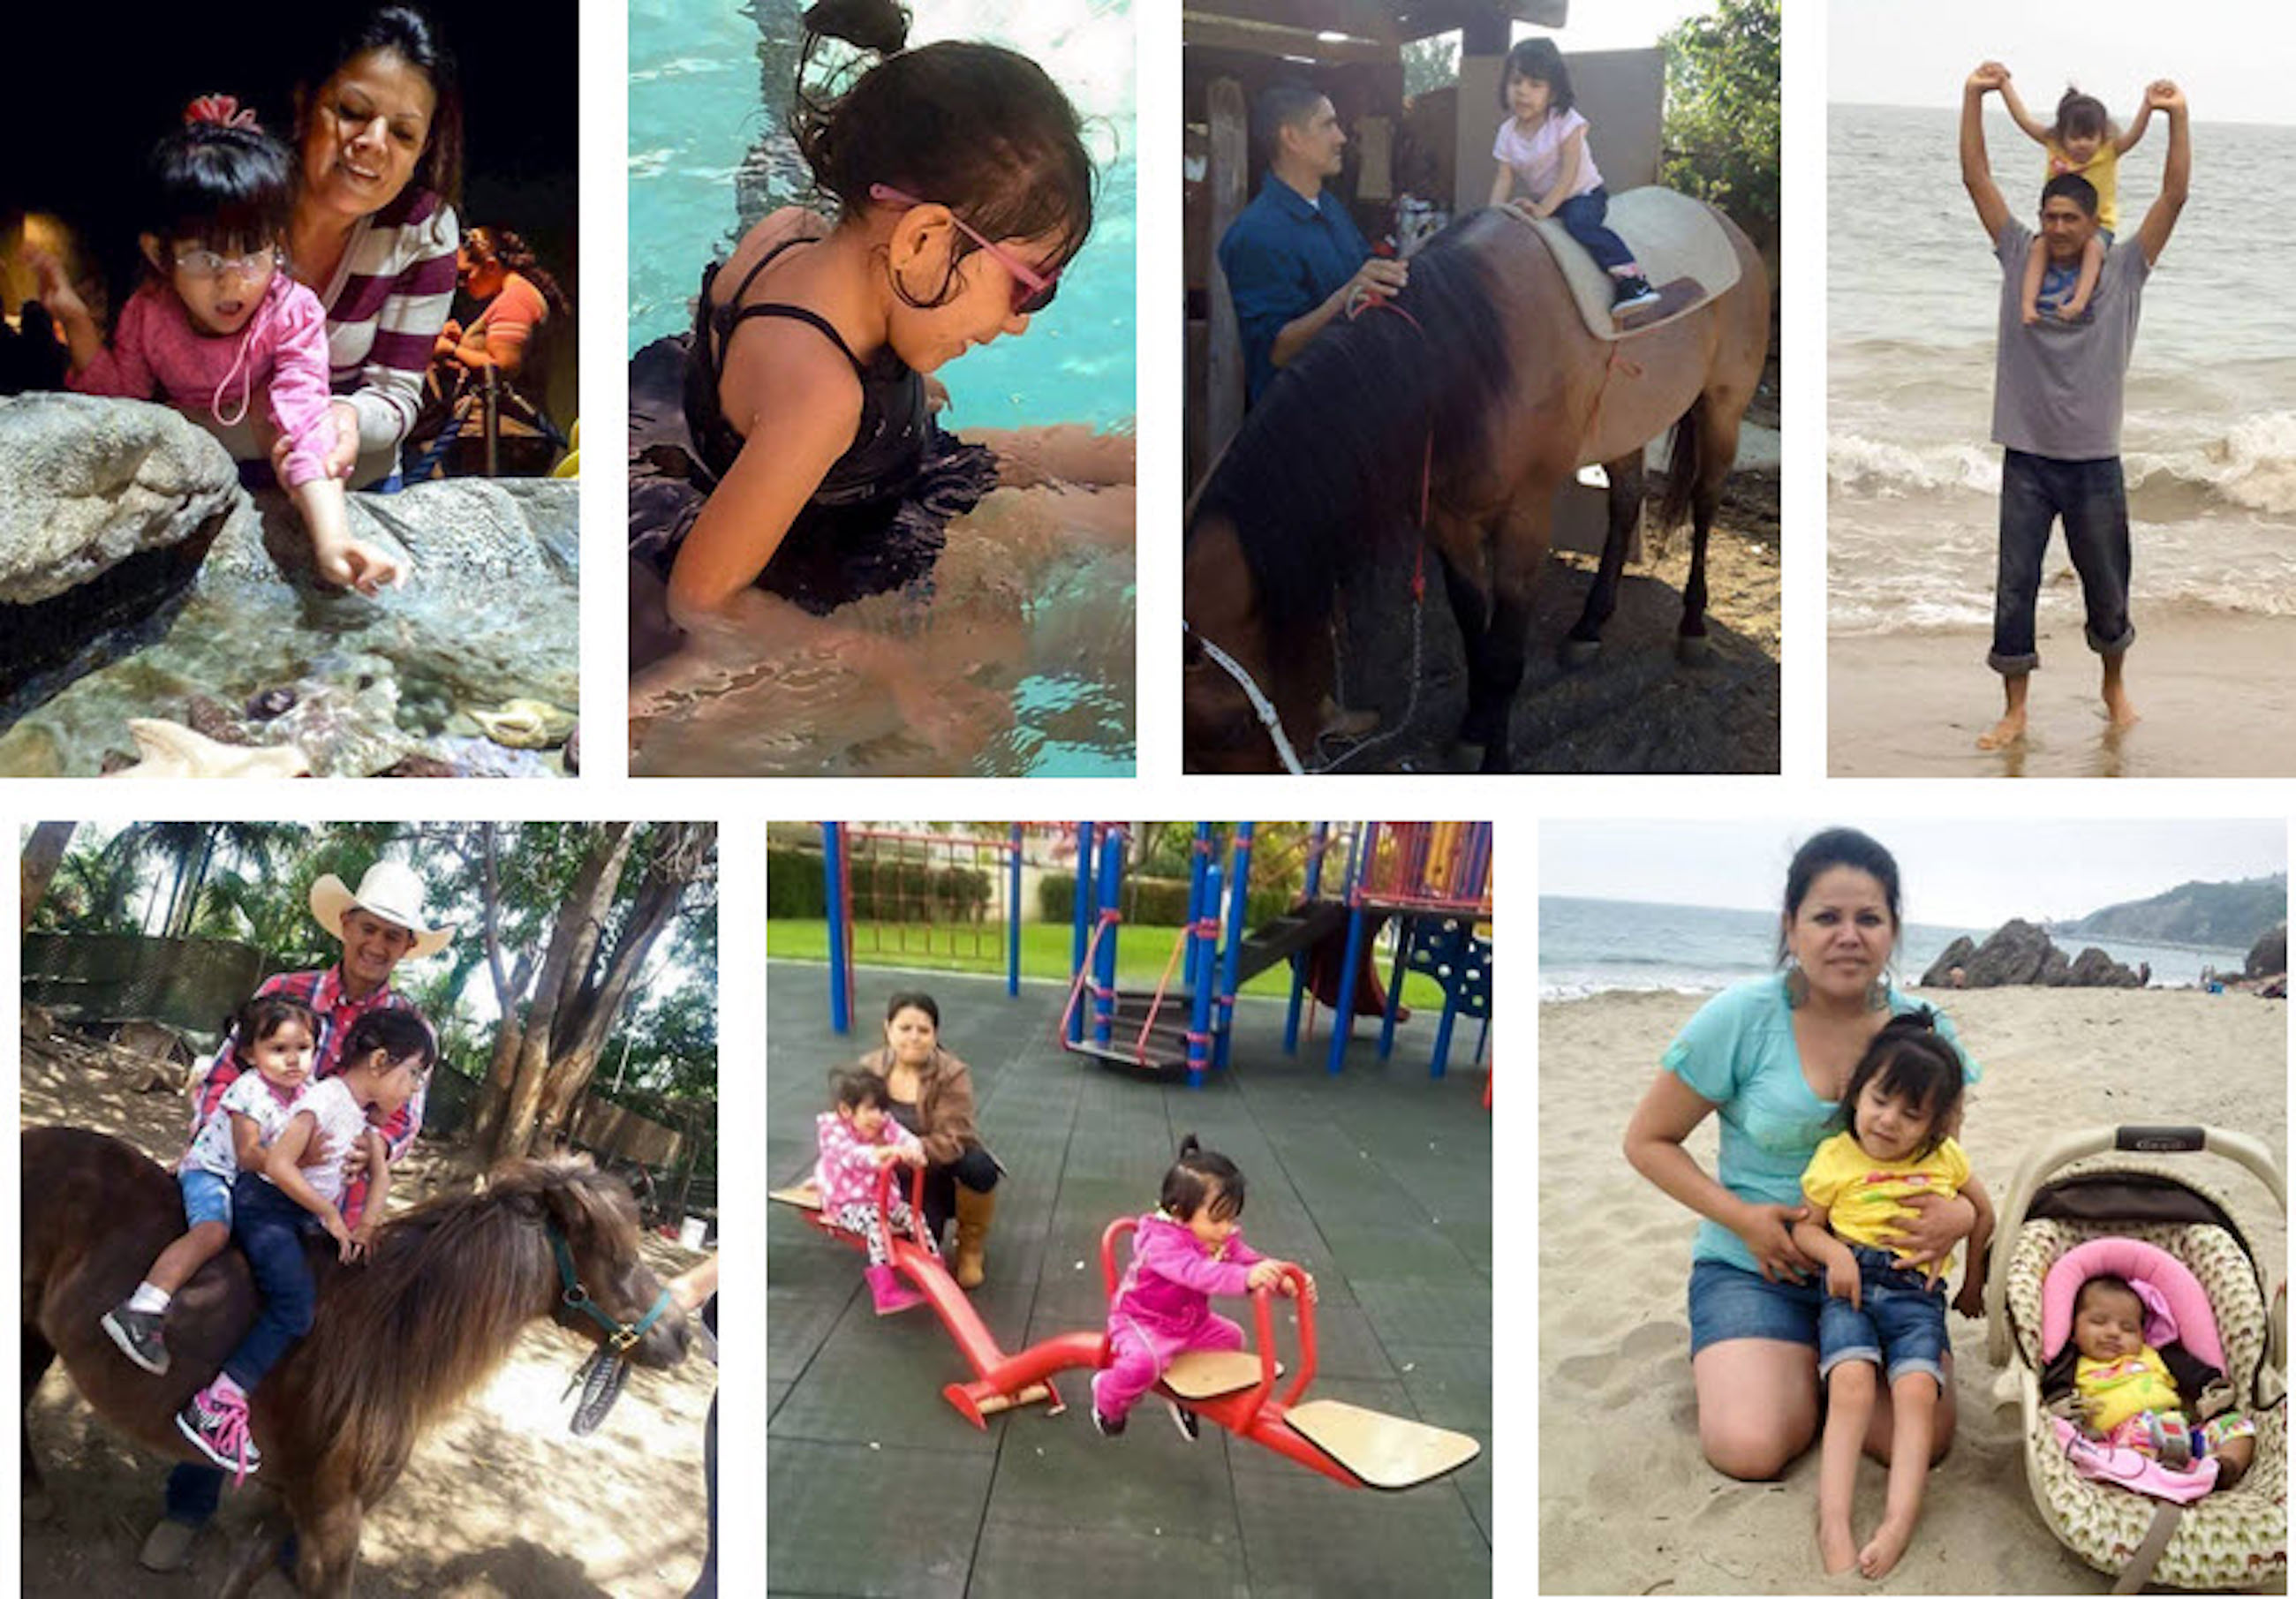 A collage of images of valerie doing outdoor activities with her family, including horseback riding, swimming, playing at the park.